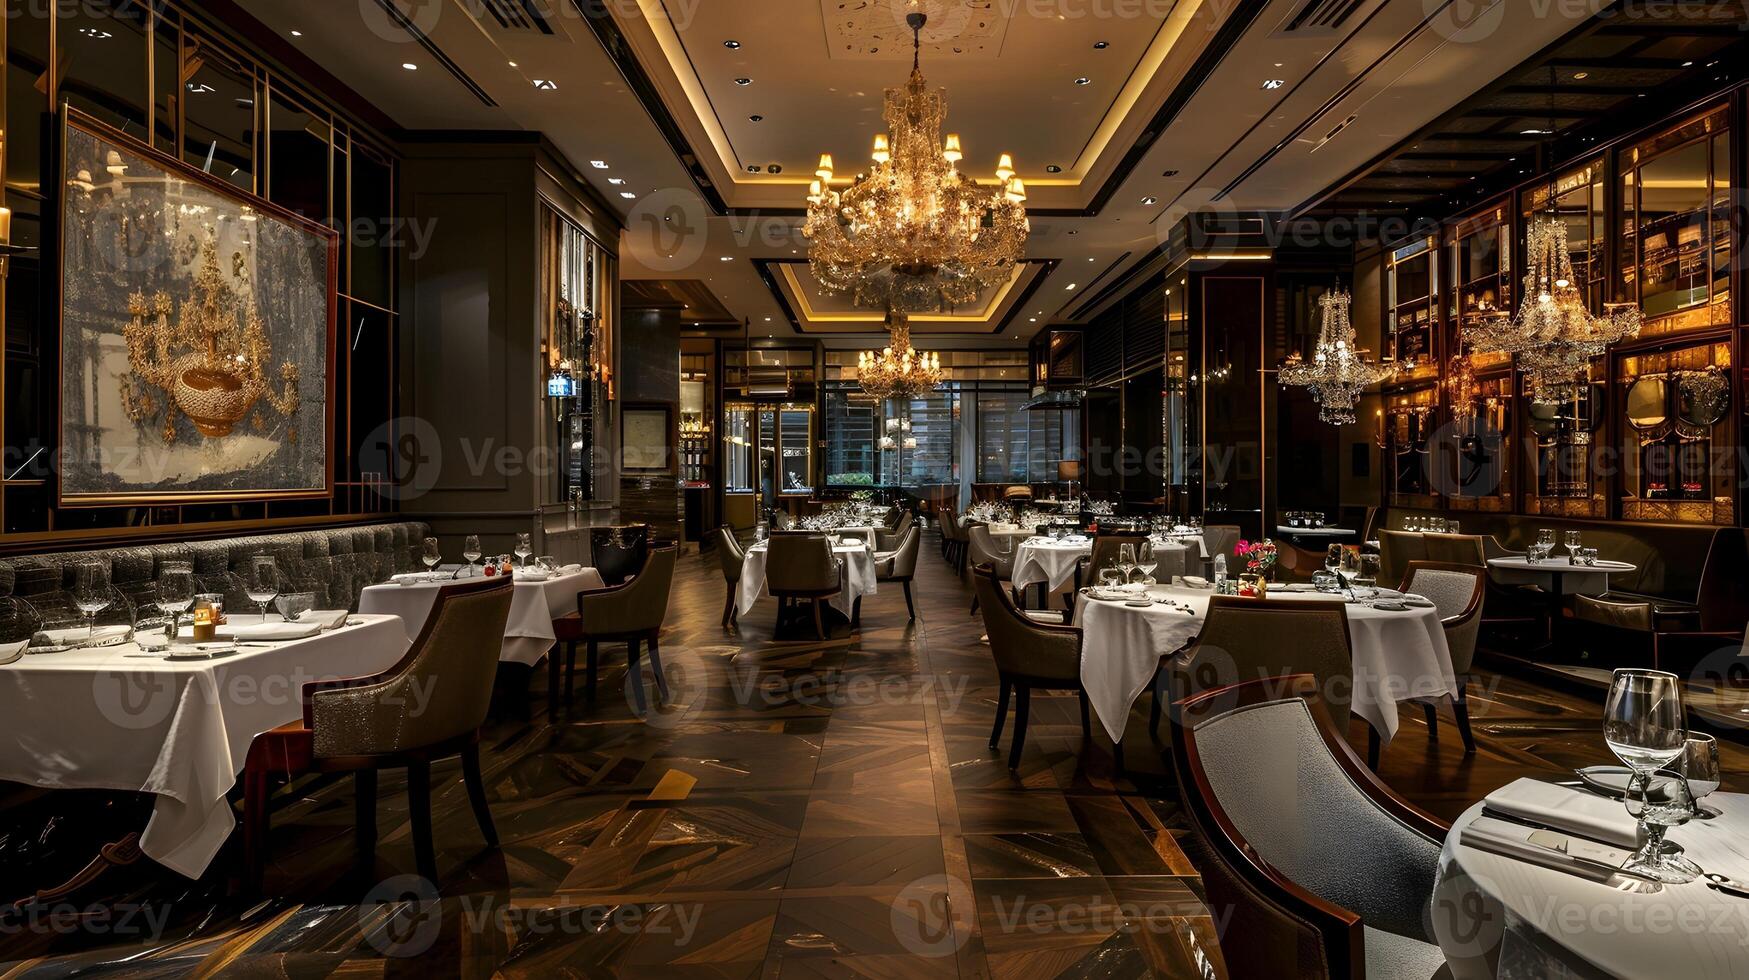 Lavish and Elegant Interior of an Upscale Fine Dining Restaurant with Ornate Chandeliers and Luxurious Furnishings photo